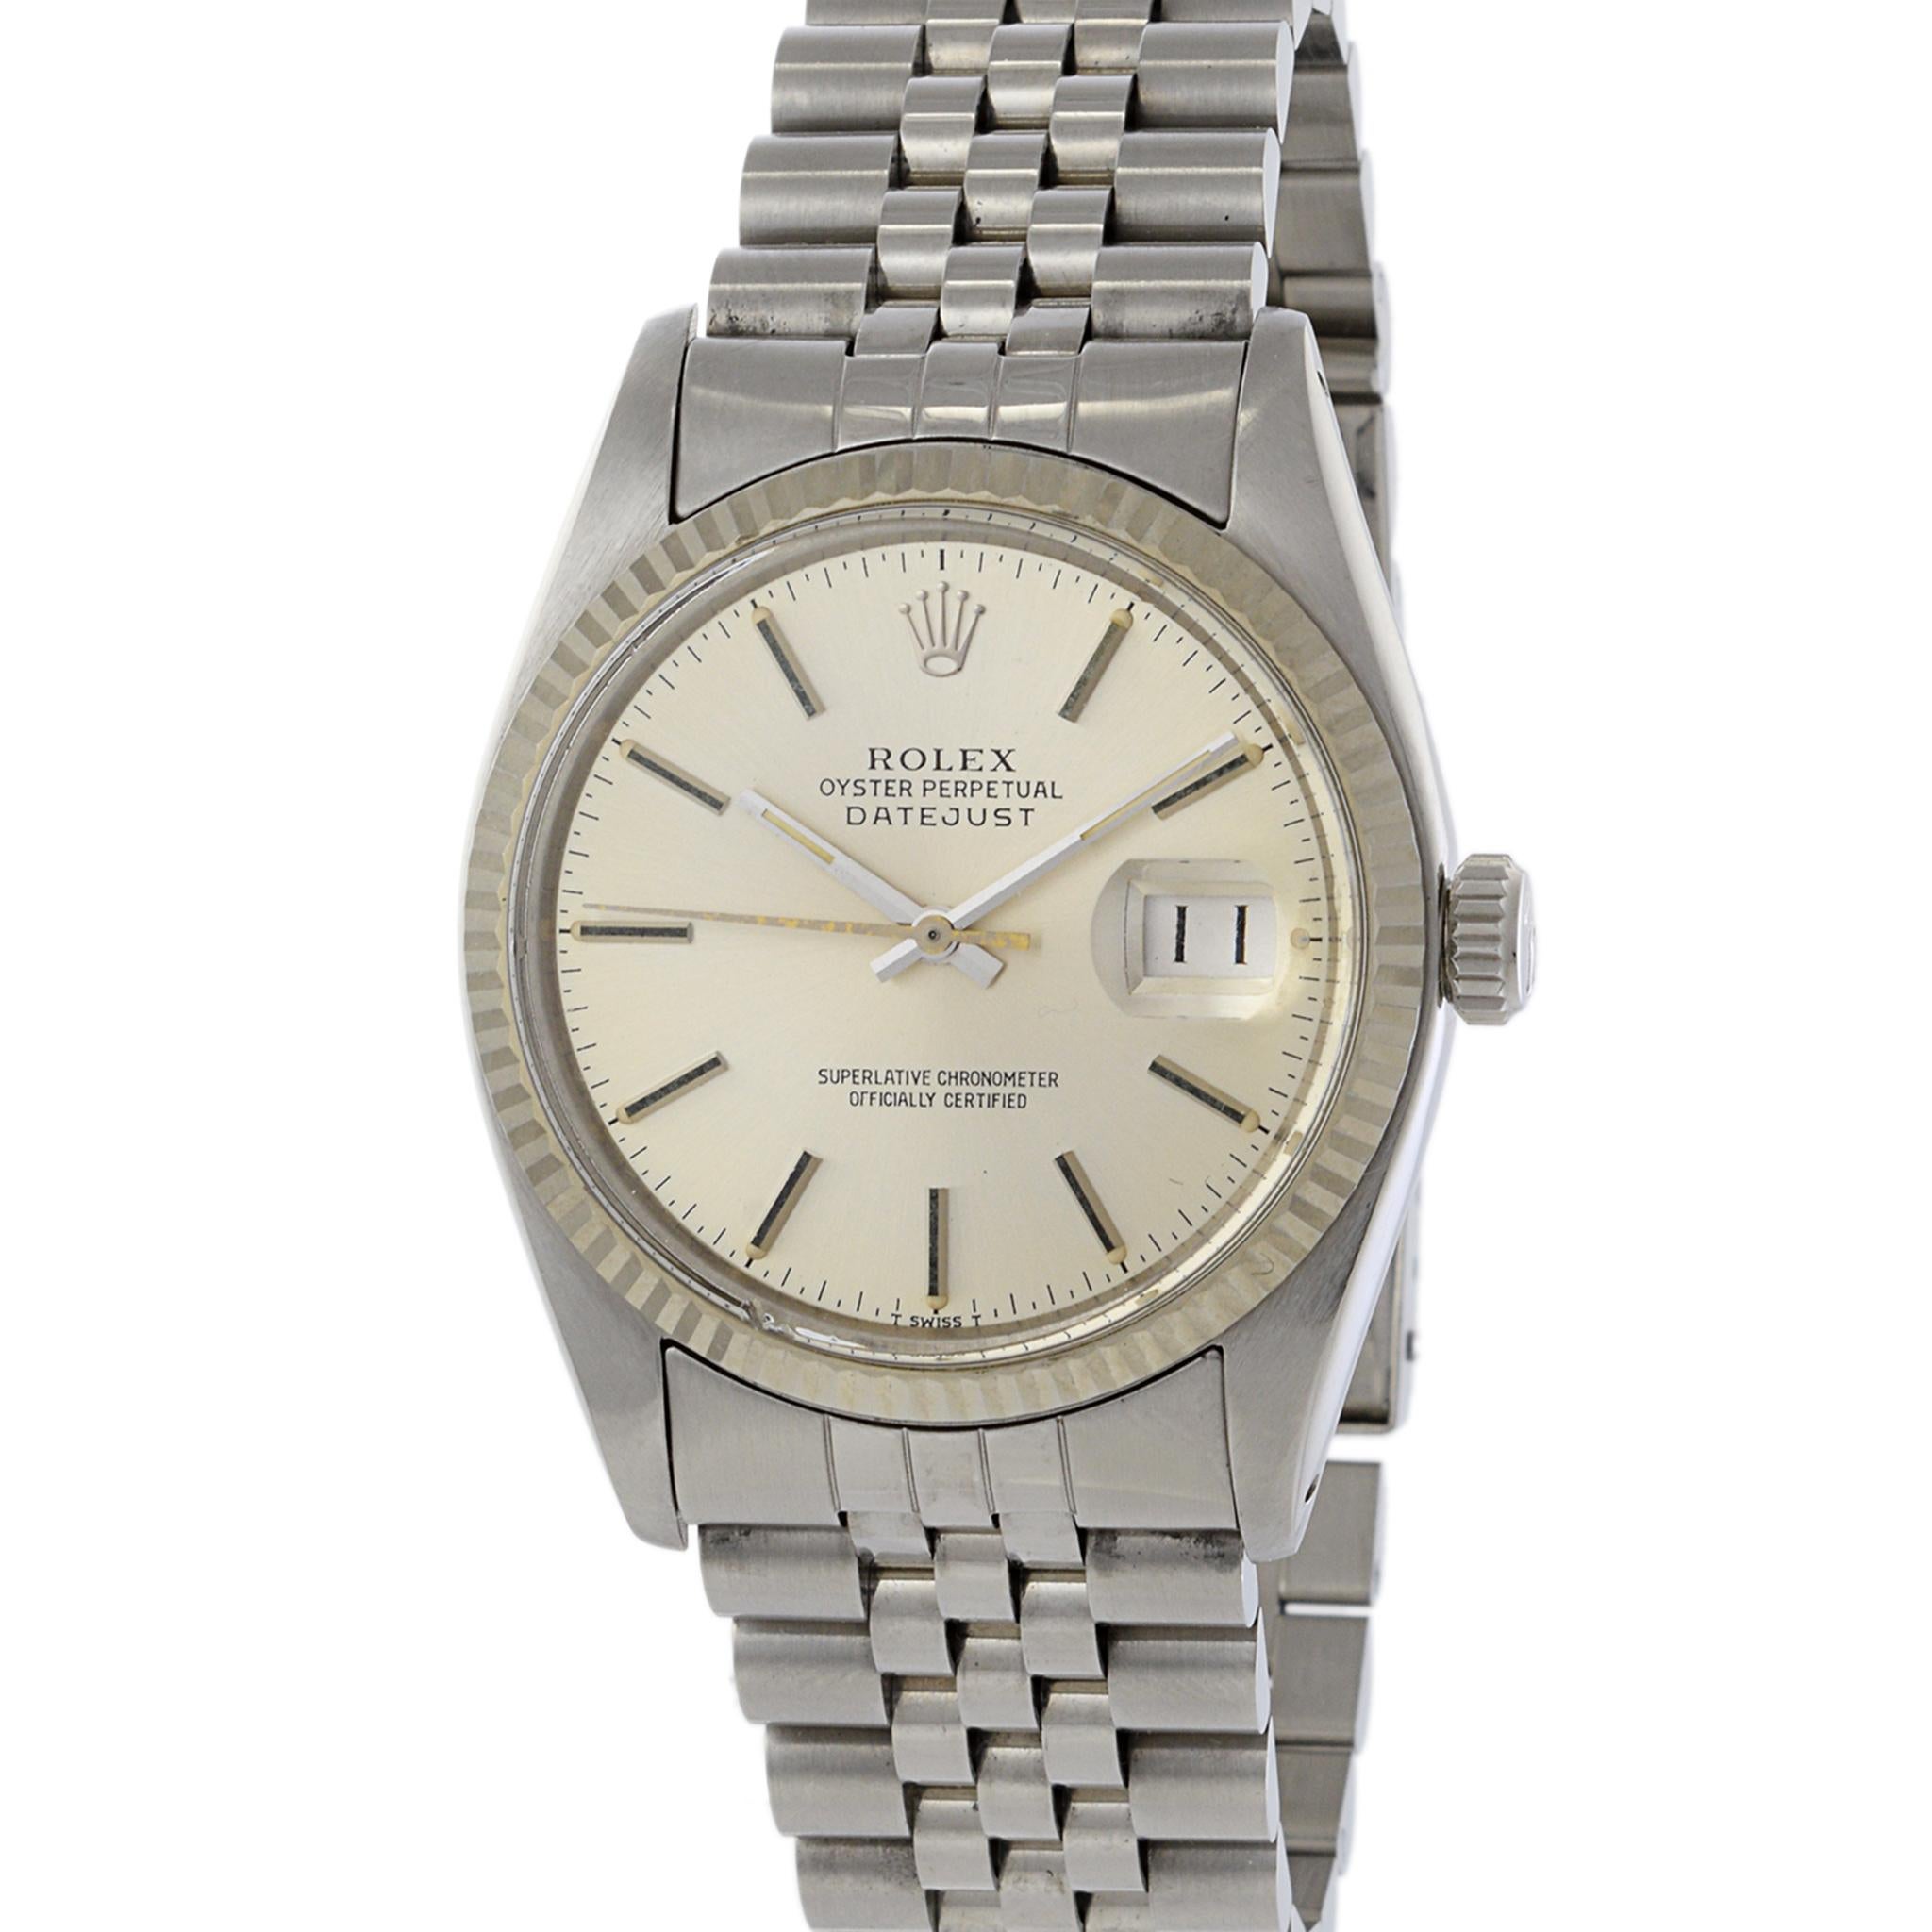 Rolex Datejust 36 Quickset Reference 16014 In Good Condition For Sale In New York, NY